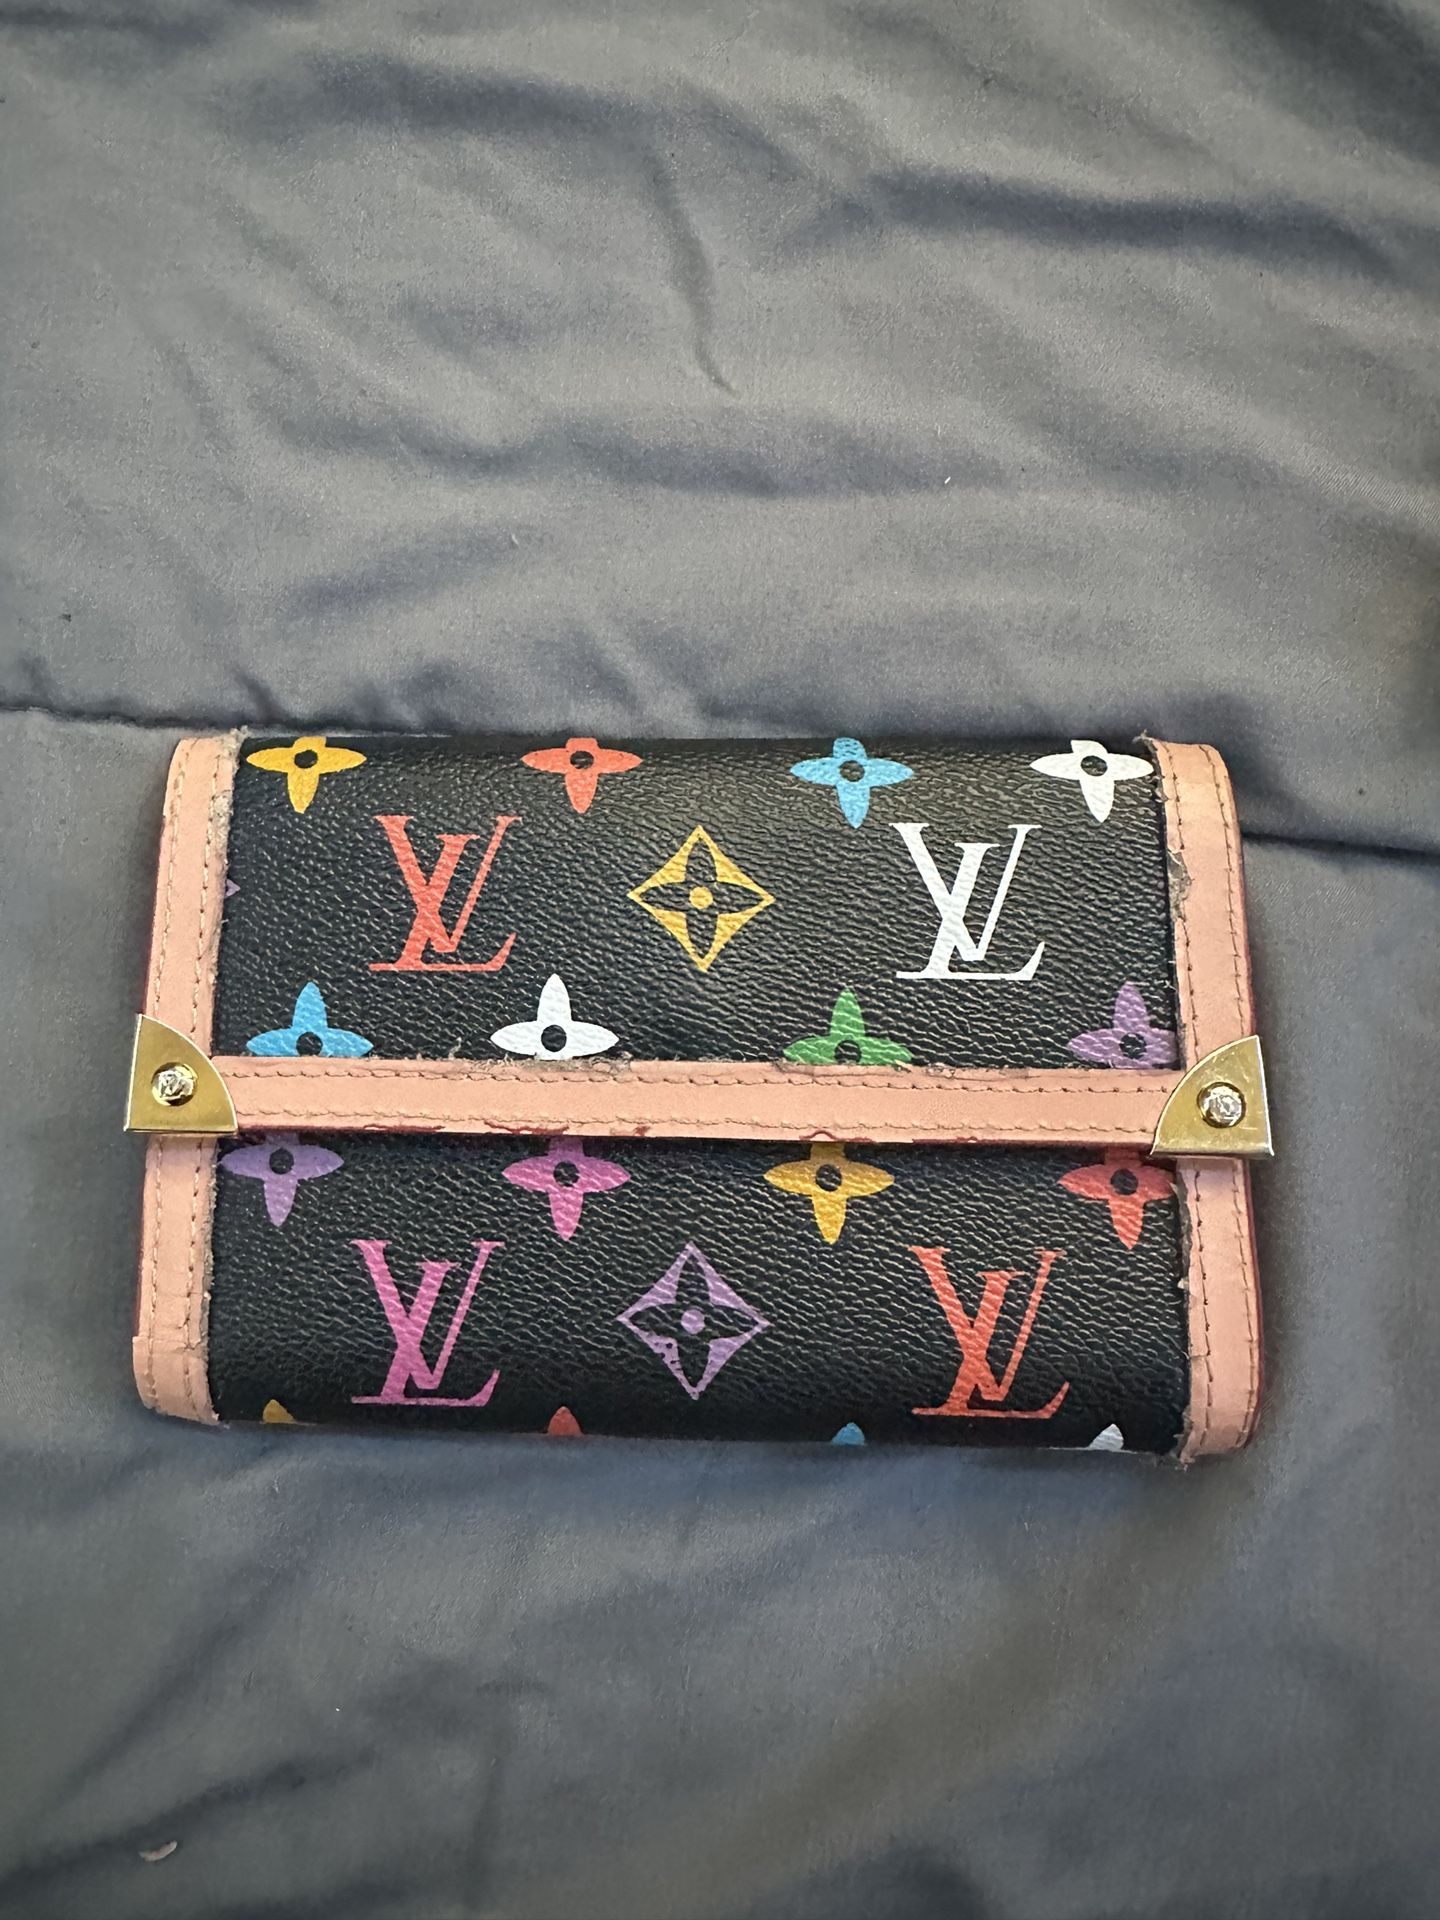 Louis Vuitton Hangbag for Sale in Portland, OR - OfferUp